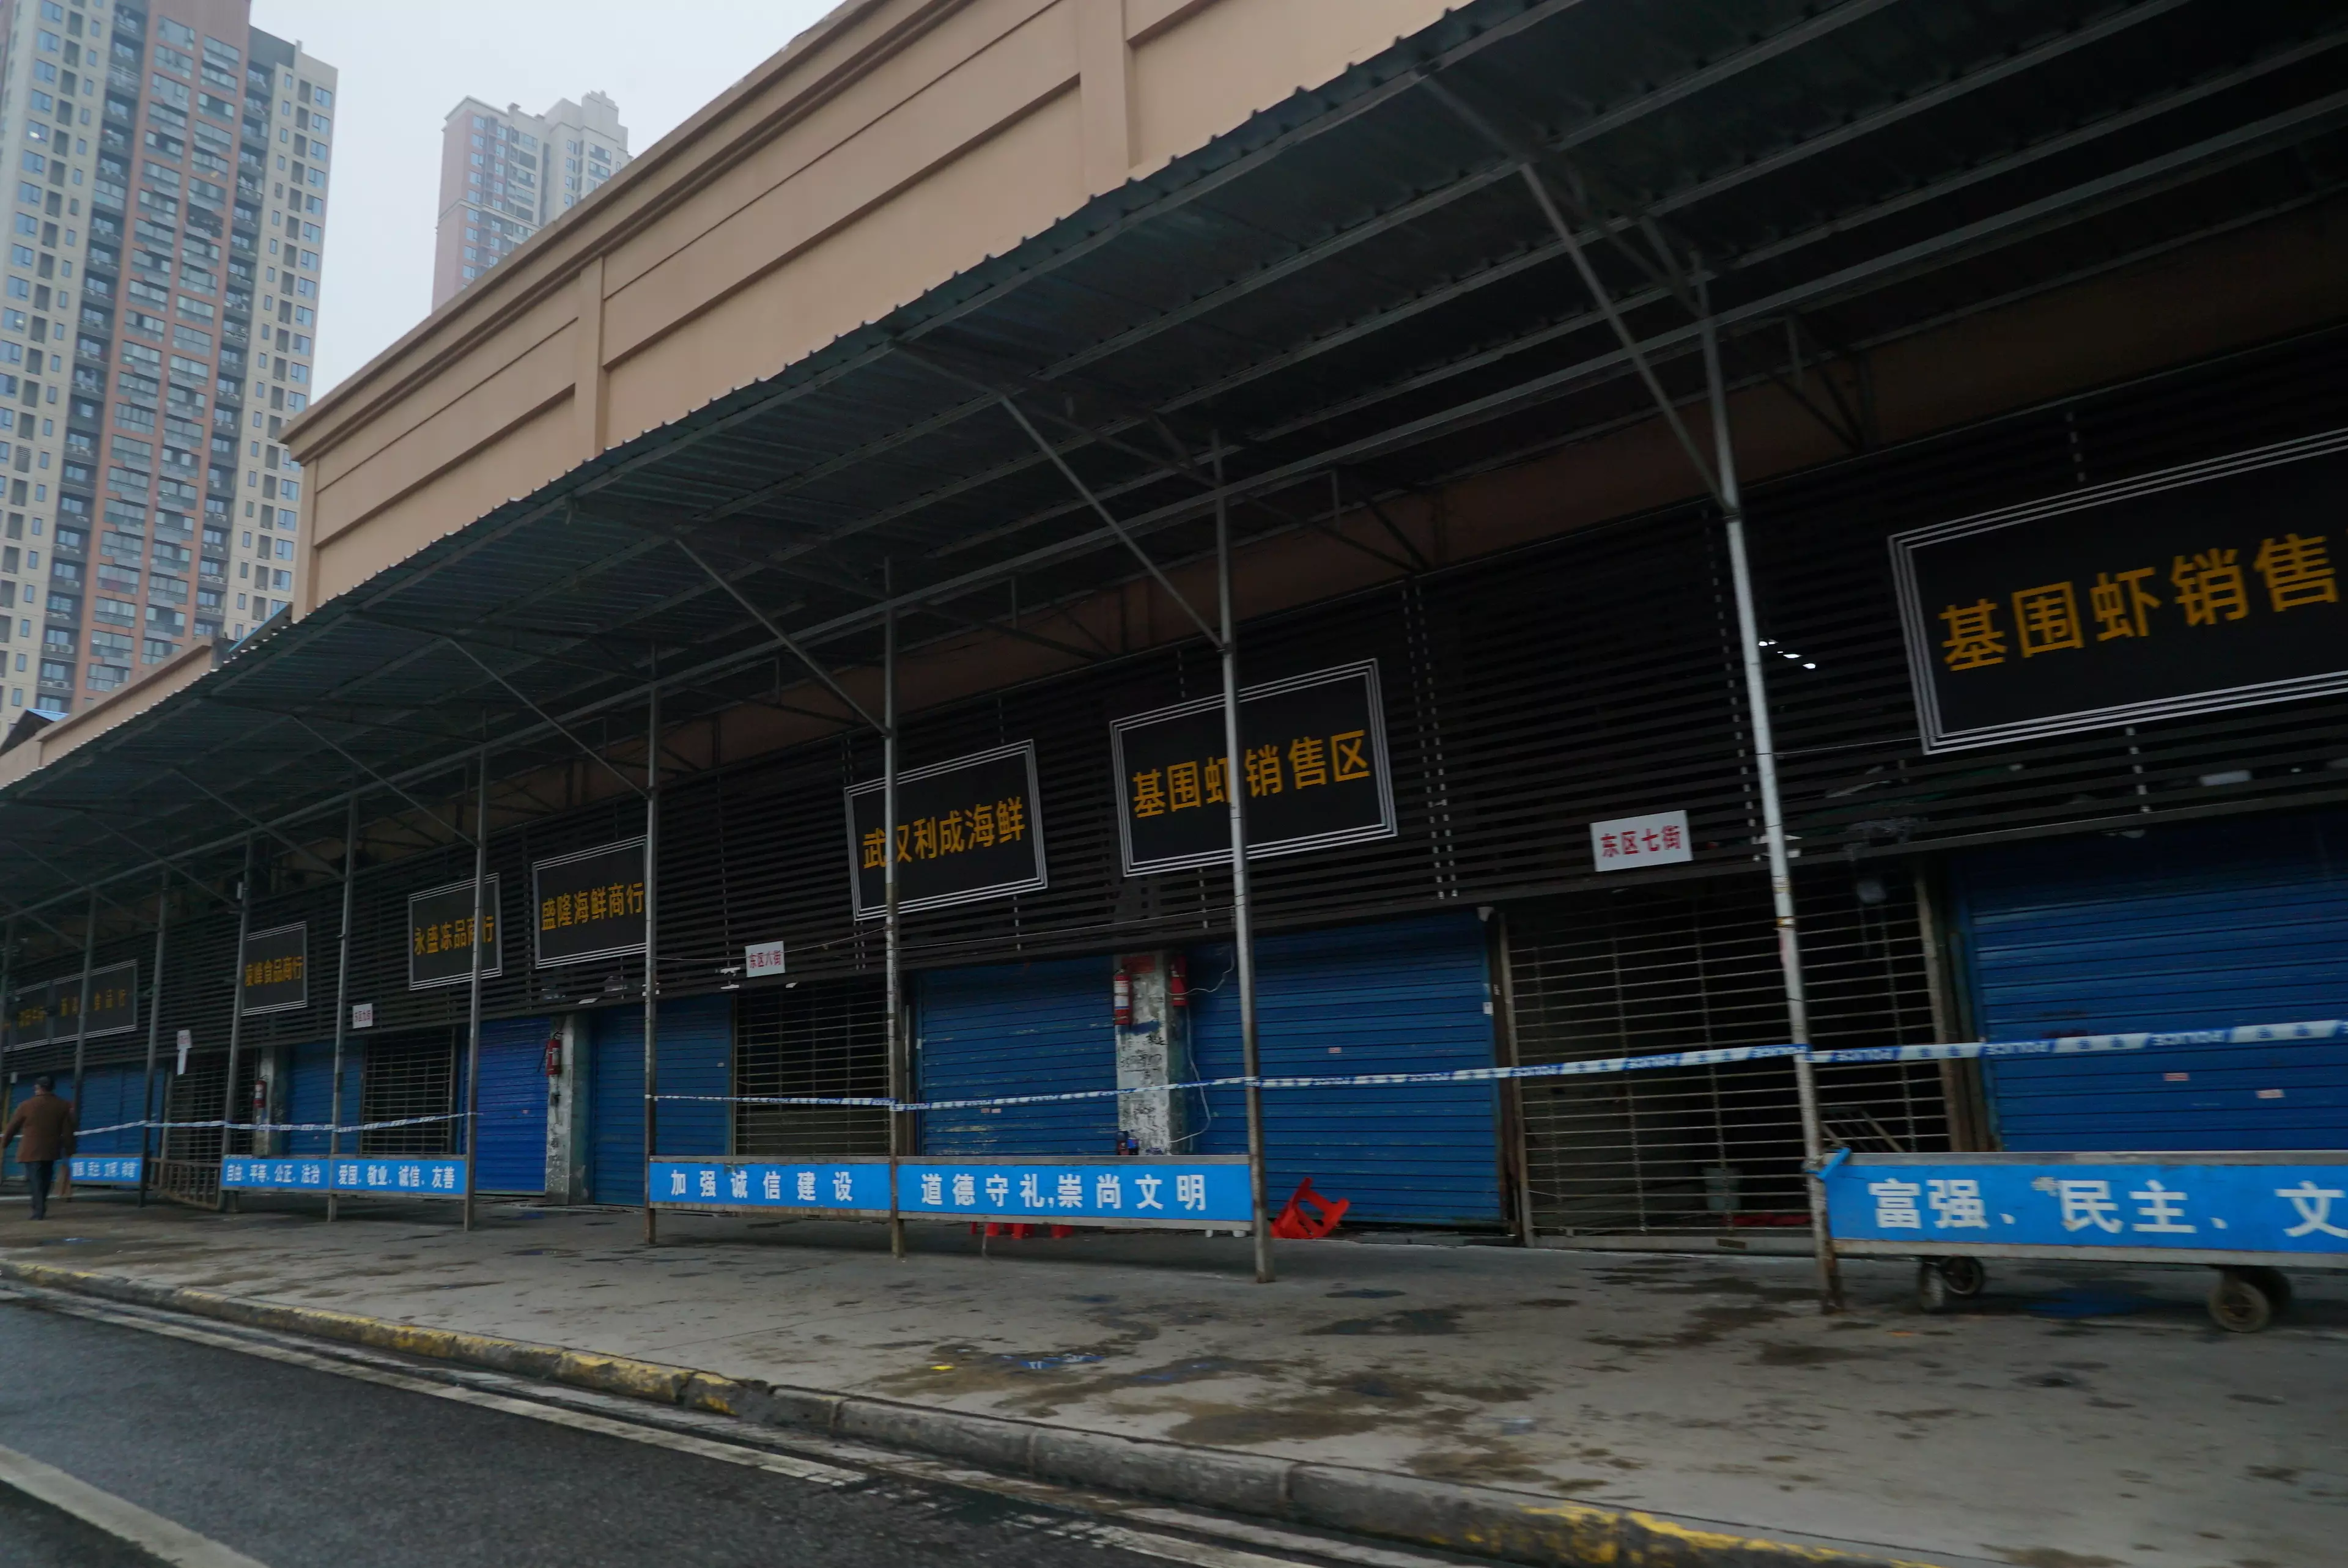 The Wuhan Huanan Wholesale Seafood Market remained closed on 21 January.